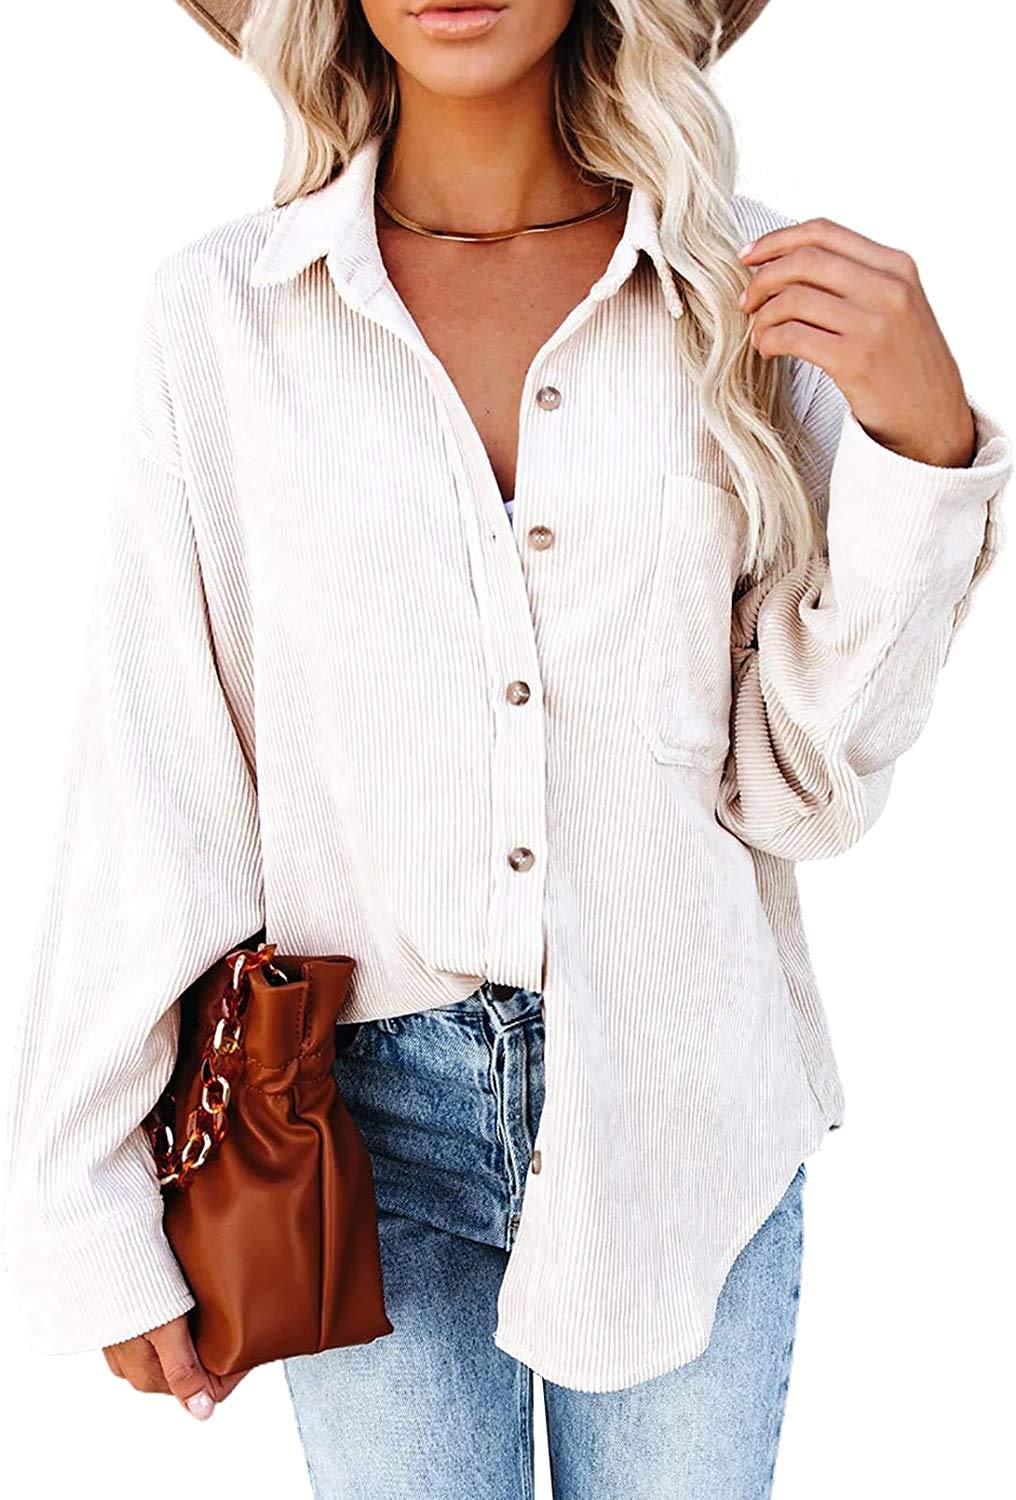 MIHOLL Women Corduroy Long Sleeve Button Down Collared Shirt Jacket To